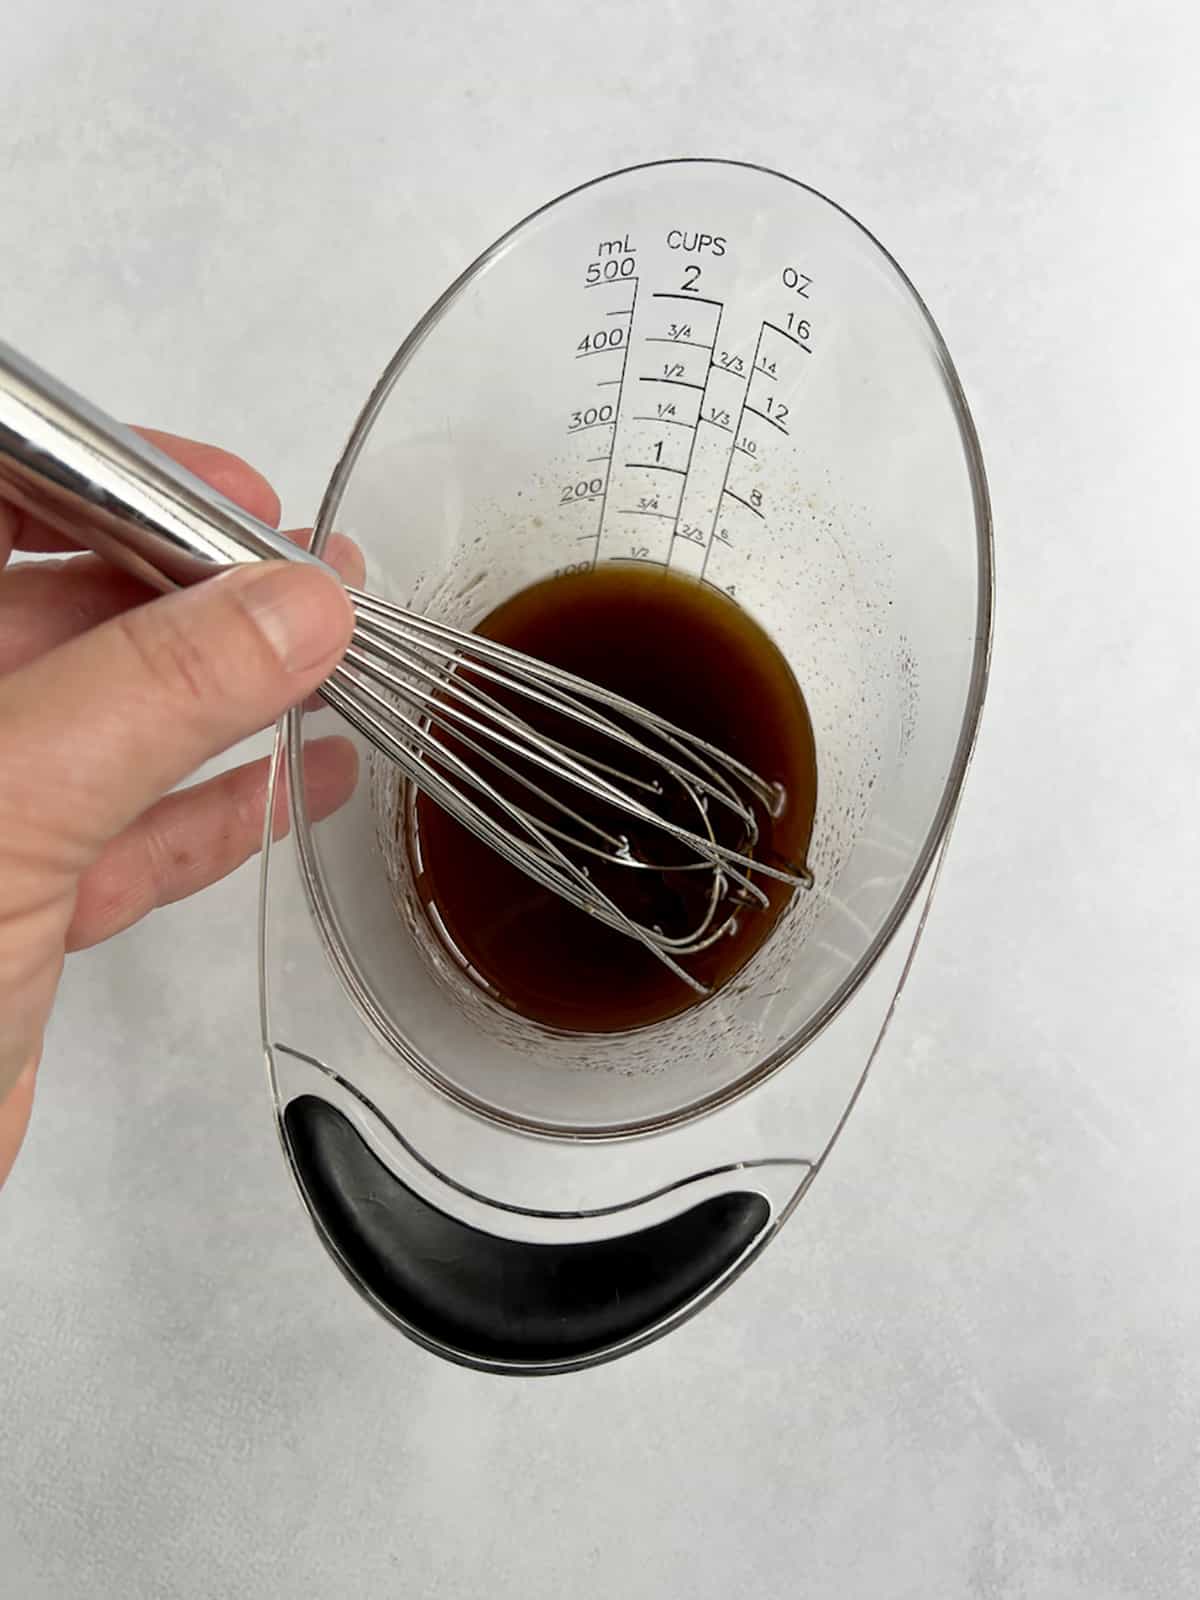 Liquid ingredients in a measuring cup with a hand holding a whisk.